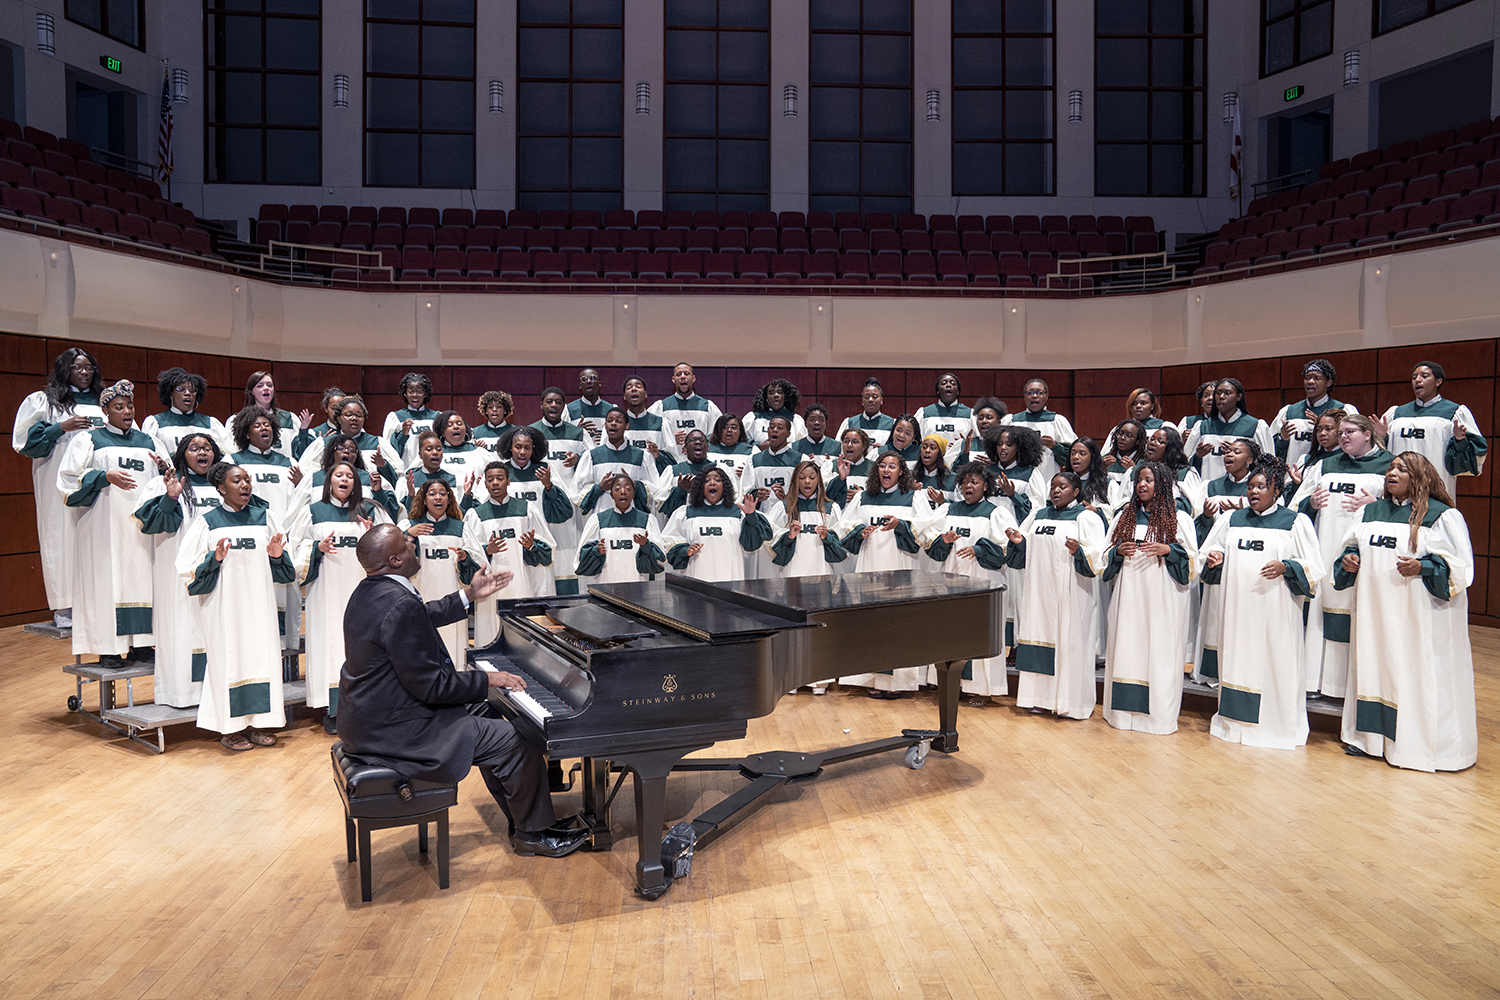 From side, Dr. Reginald Jackson, EdD (Instructor, Music; Director, UAB Gospel Choir) is playing a Steinway & Sons grand piano while directting students in UAB Gospel Choir wearing their robes while on stage in the Jemison Concert Hall at the Alys Stephens Performing Arts Center, 2019.